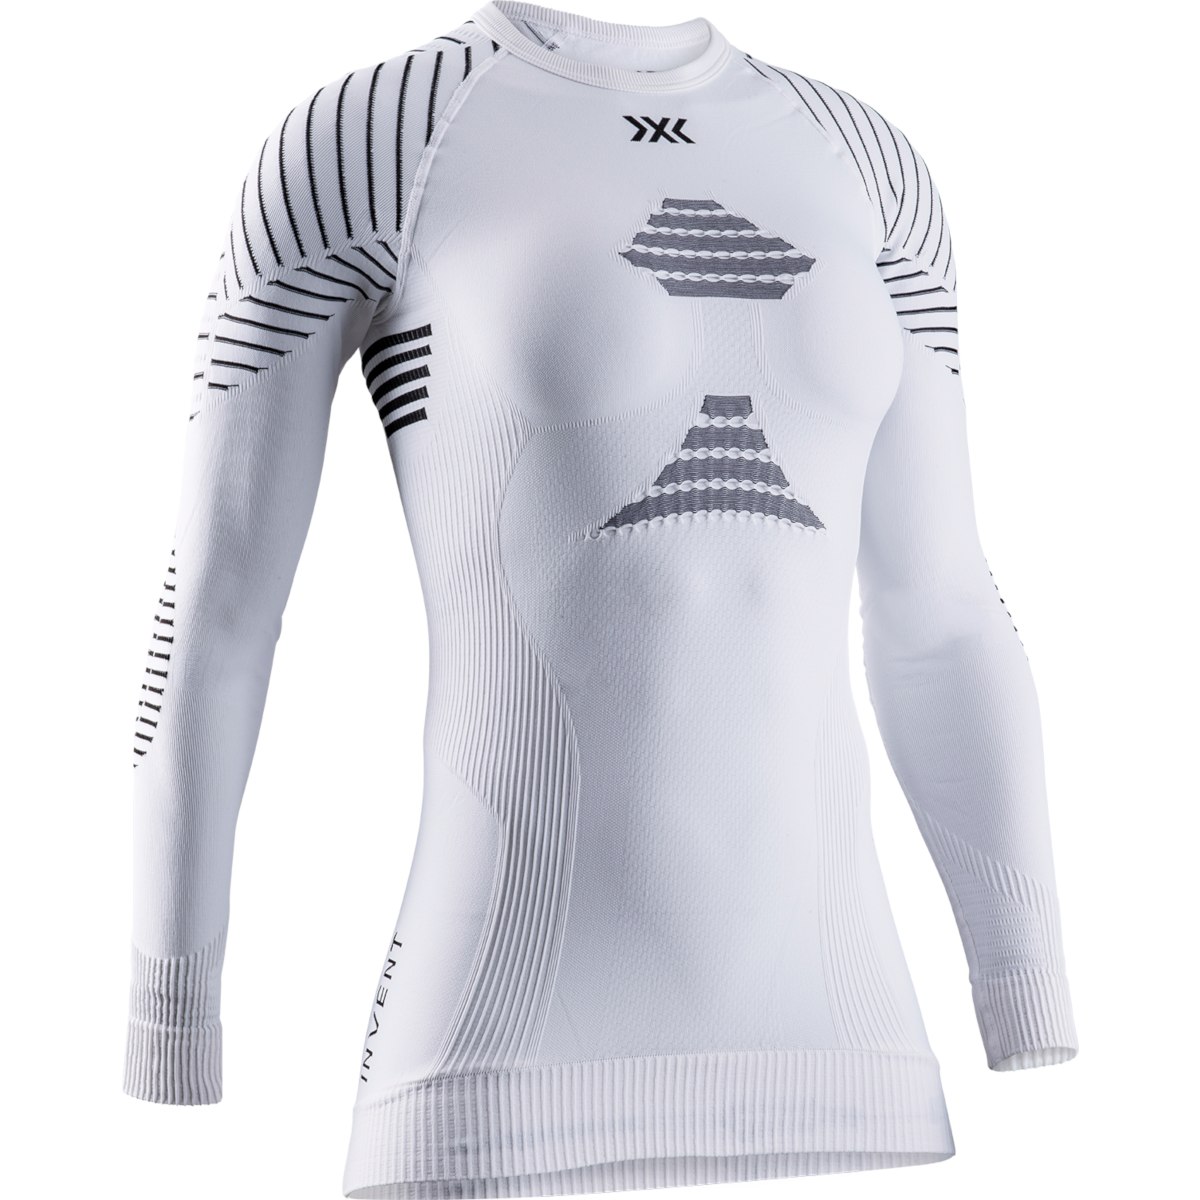 Picture of X-Bionic Invent 4.0 Long Sleeves Shirt Women - white/black